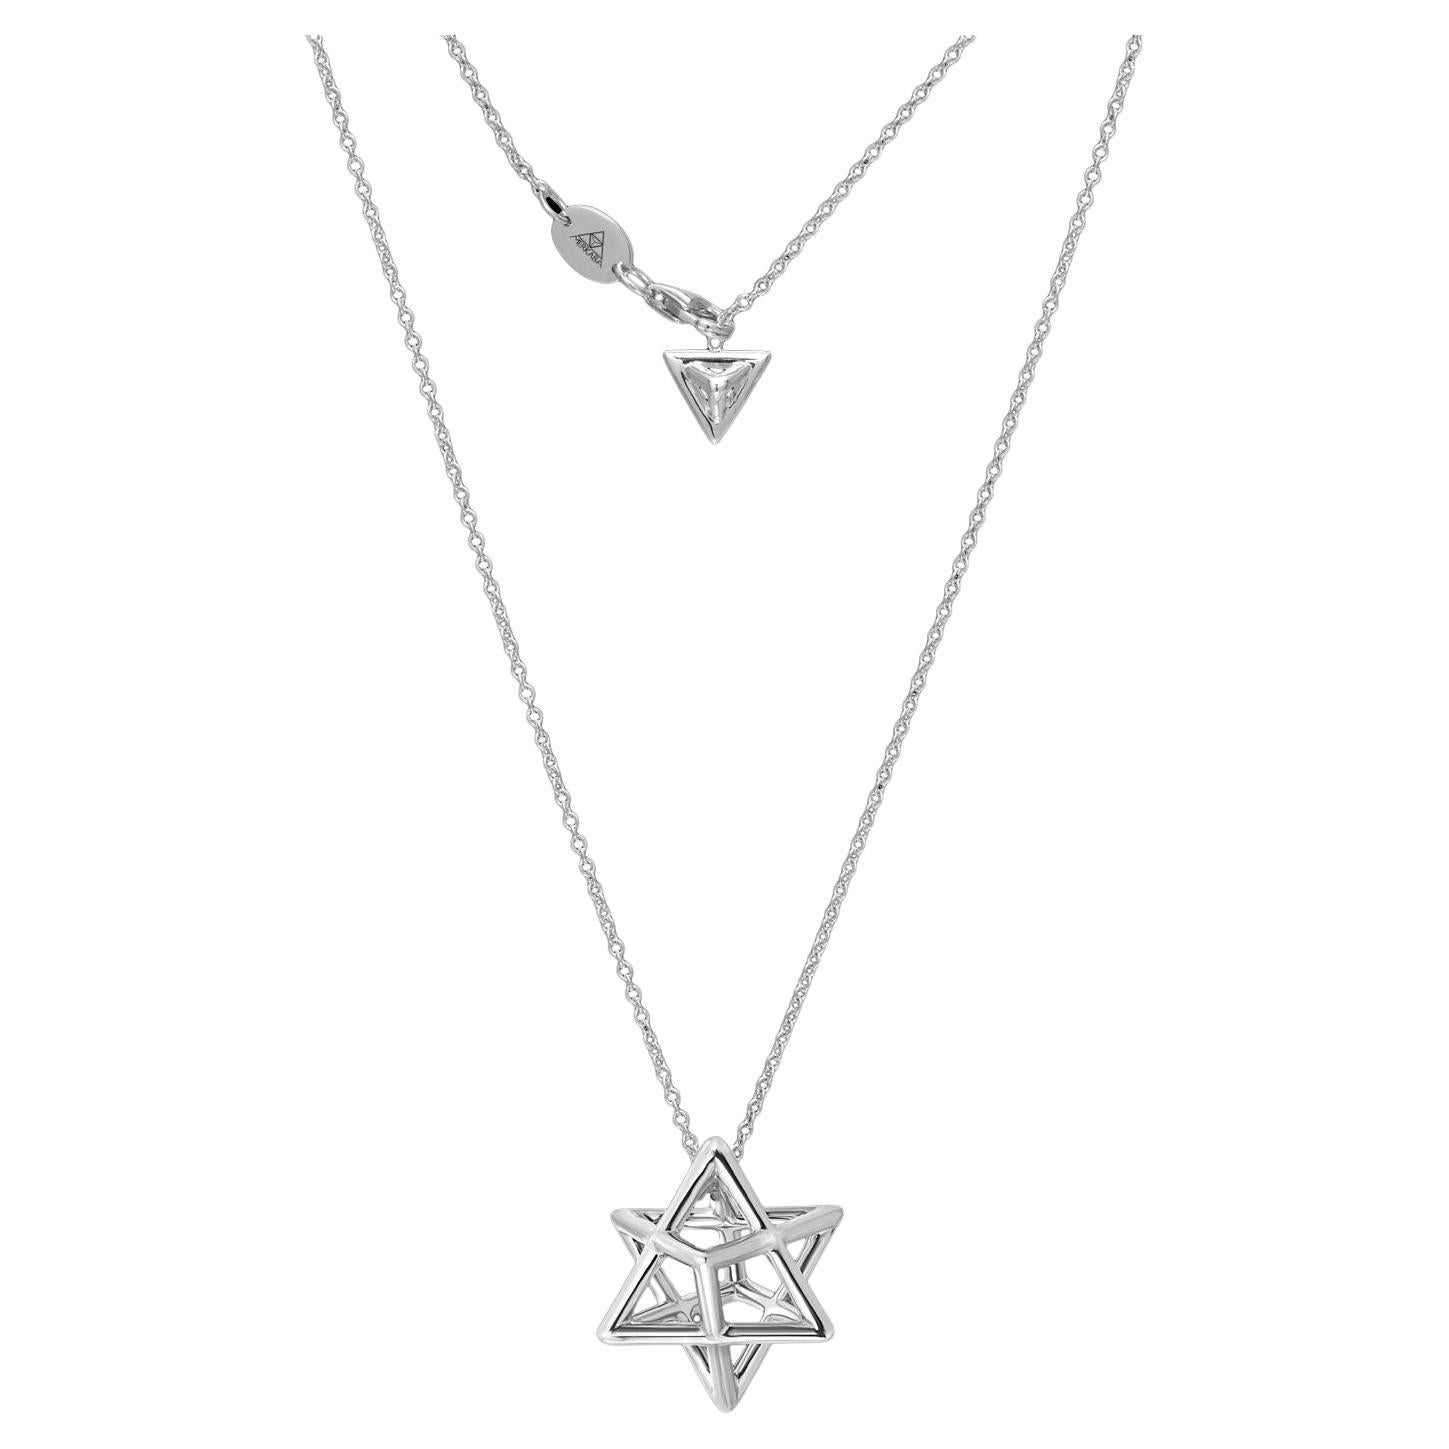 The Merkaba unisex, three dimensional Star of David silver necklace, is an architectural, sacred geometric jewelry piece, highlighting superb attention to detail and extraordinary polish, symmetry, and equilibrium. It suspends elegantly at the